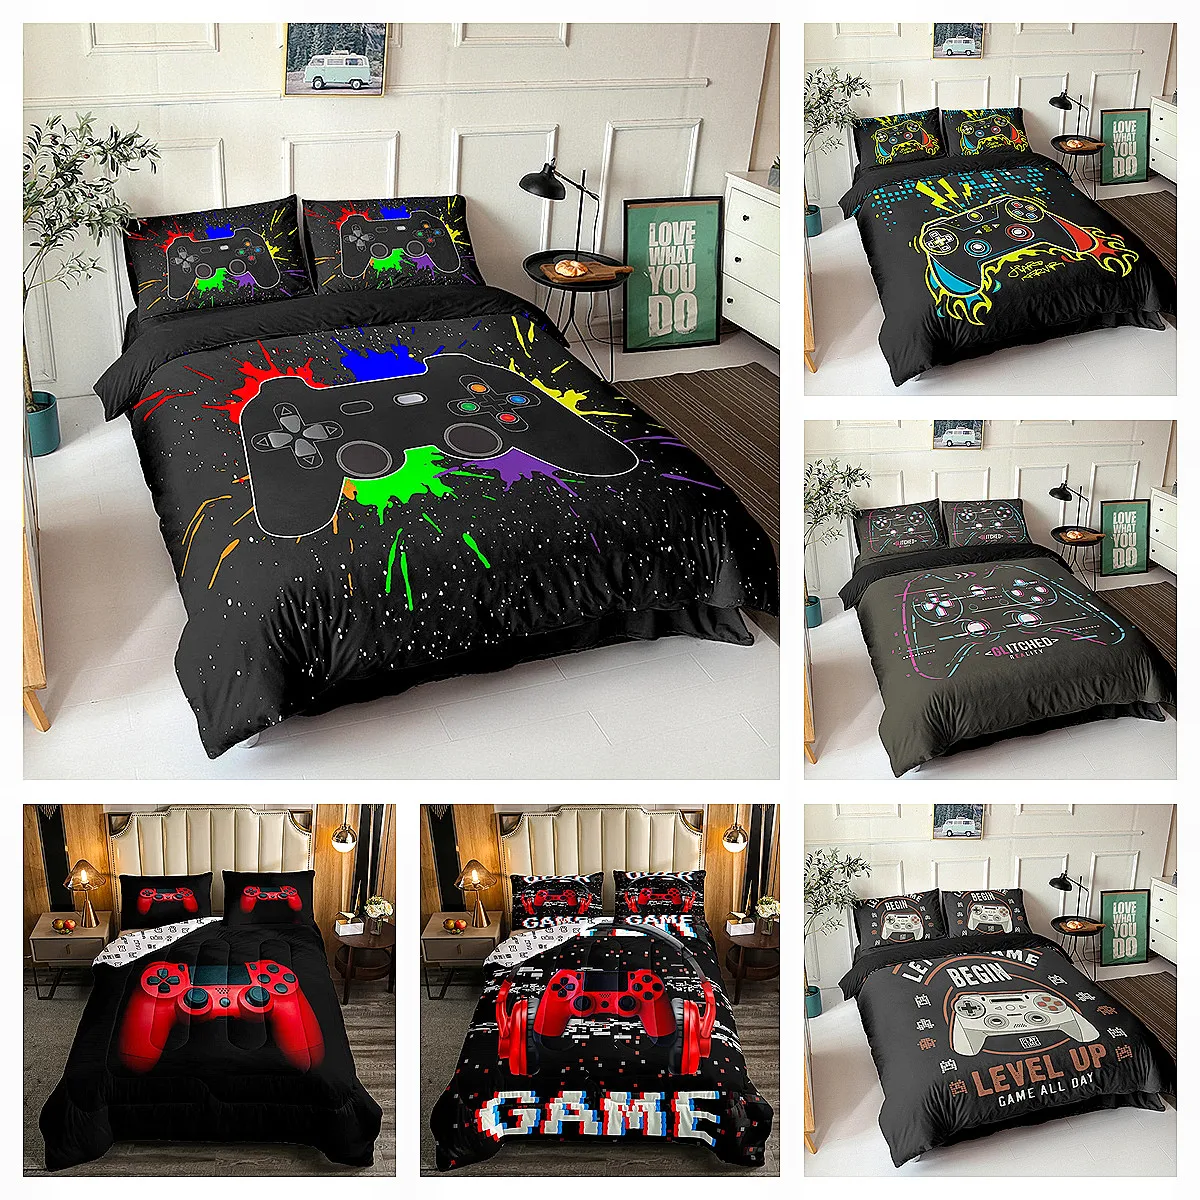 

Gamer Gamepad Bedding Set For Kid Boy Single Queen Duvet Cover Soft Bedspreads Quality Quilt Cover Zipper Design And Pillowcase